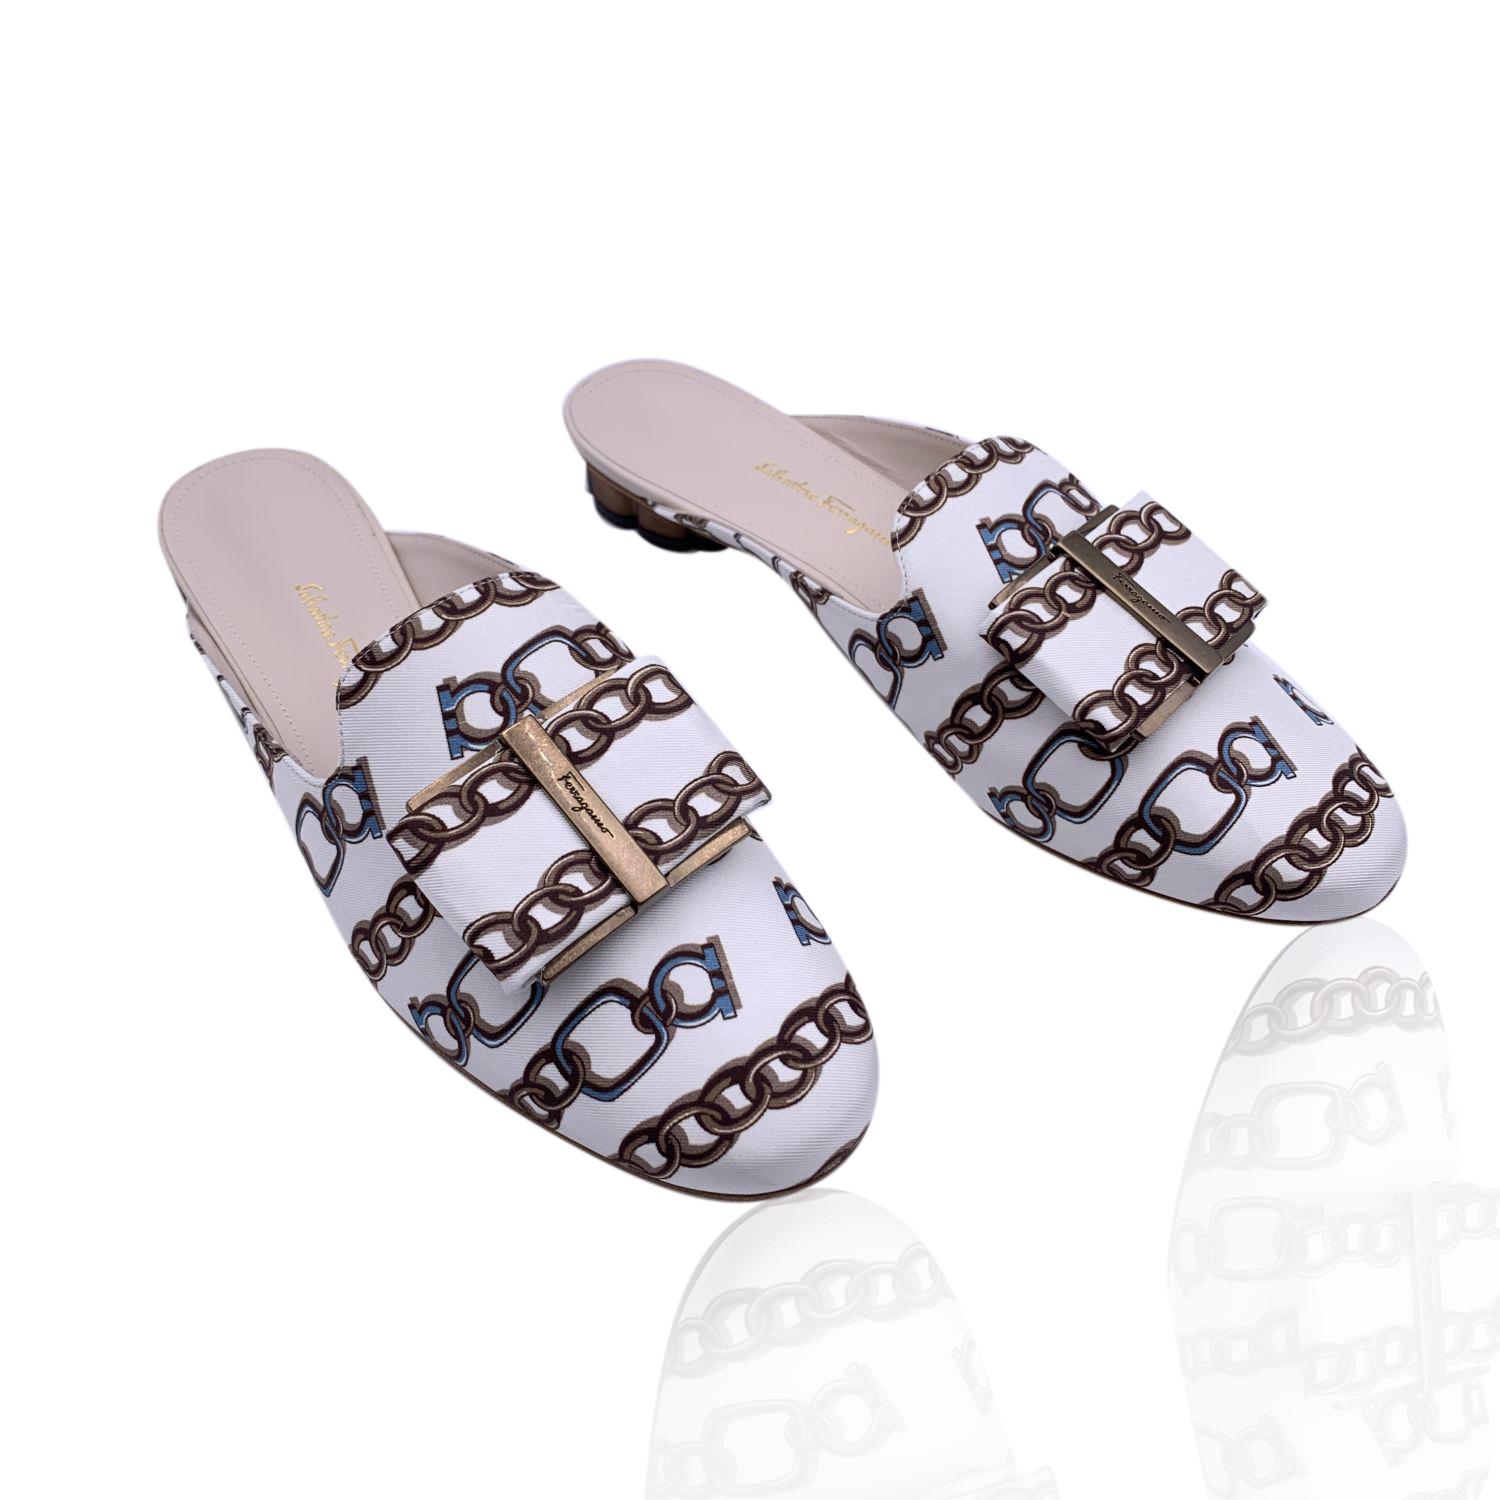 Sophisticated Salvatore Ferragamo 'Sciacca Twill' mules. Crafted in white silk twill with chain print, they feature a slip-on design, round toe, bow detailing on the toes and antiquated gold metal block flower-shaped low heel (height: 1 cm). Leather